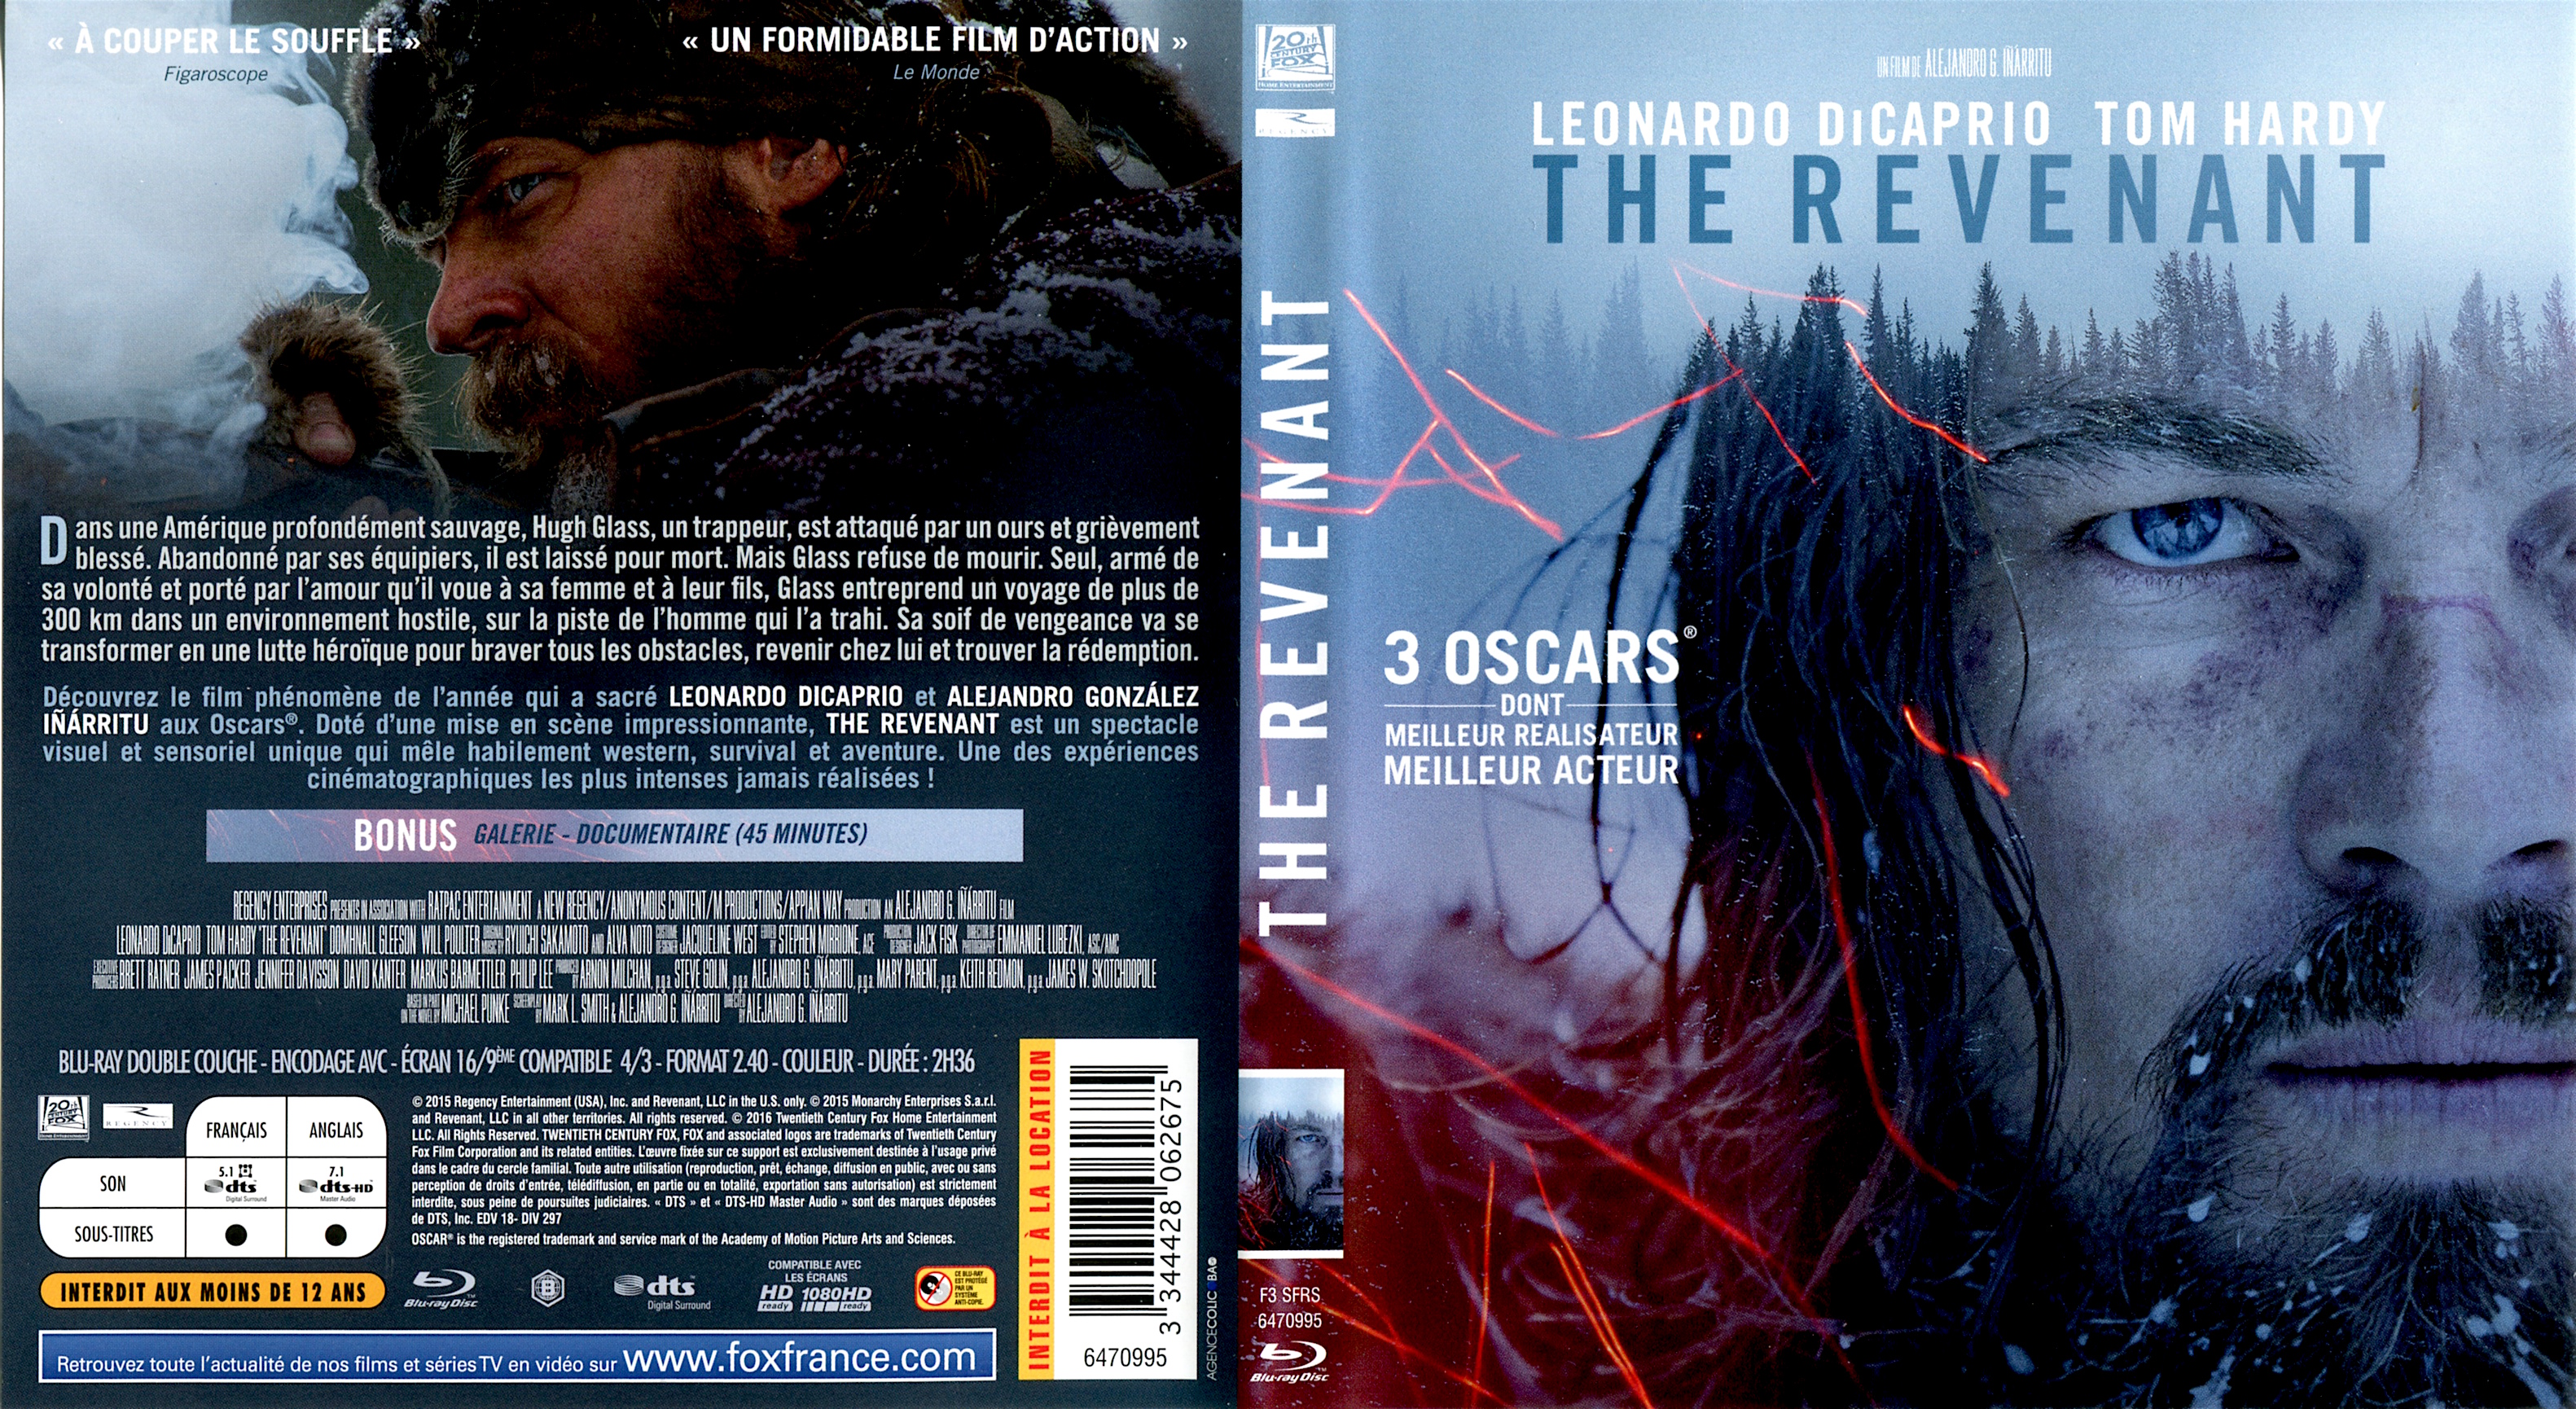 Jaquette DVD The Revenant (BLU-RAY)